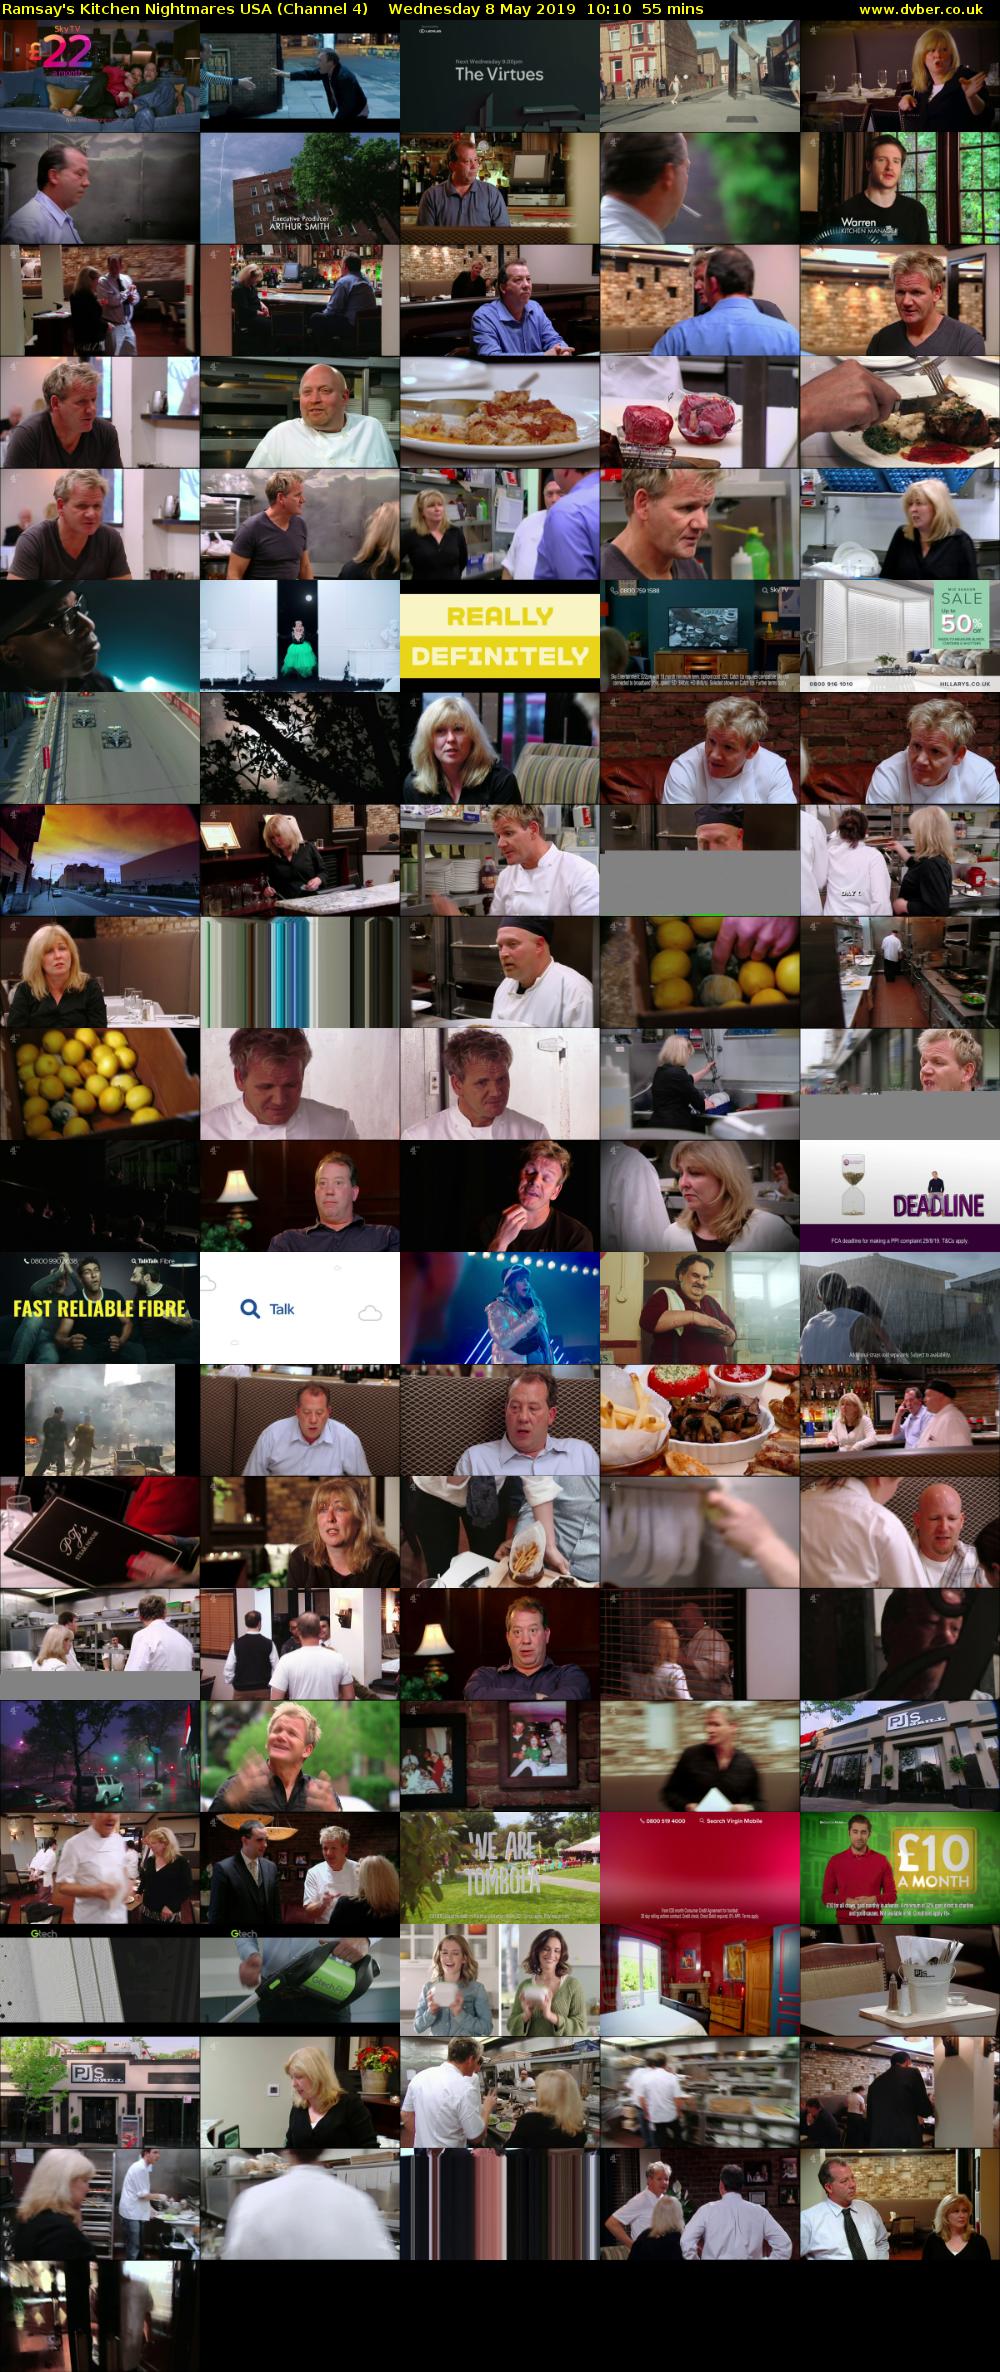 Ramsay's Kitchen Nightmares USA (Channel 4) Wednesday 8 May 2019 10:10 - 11:05